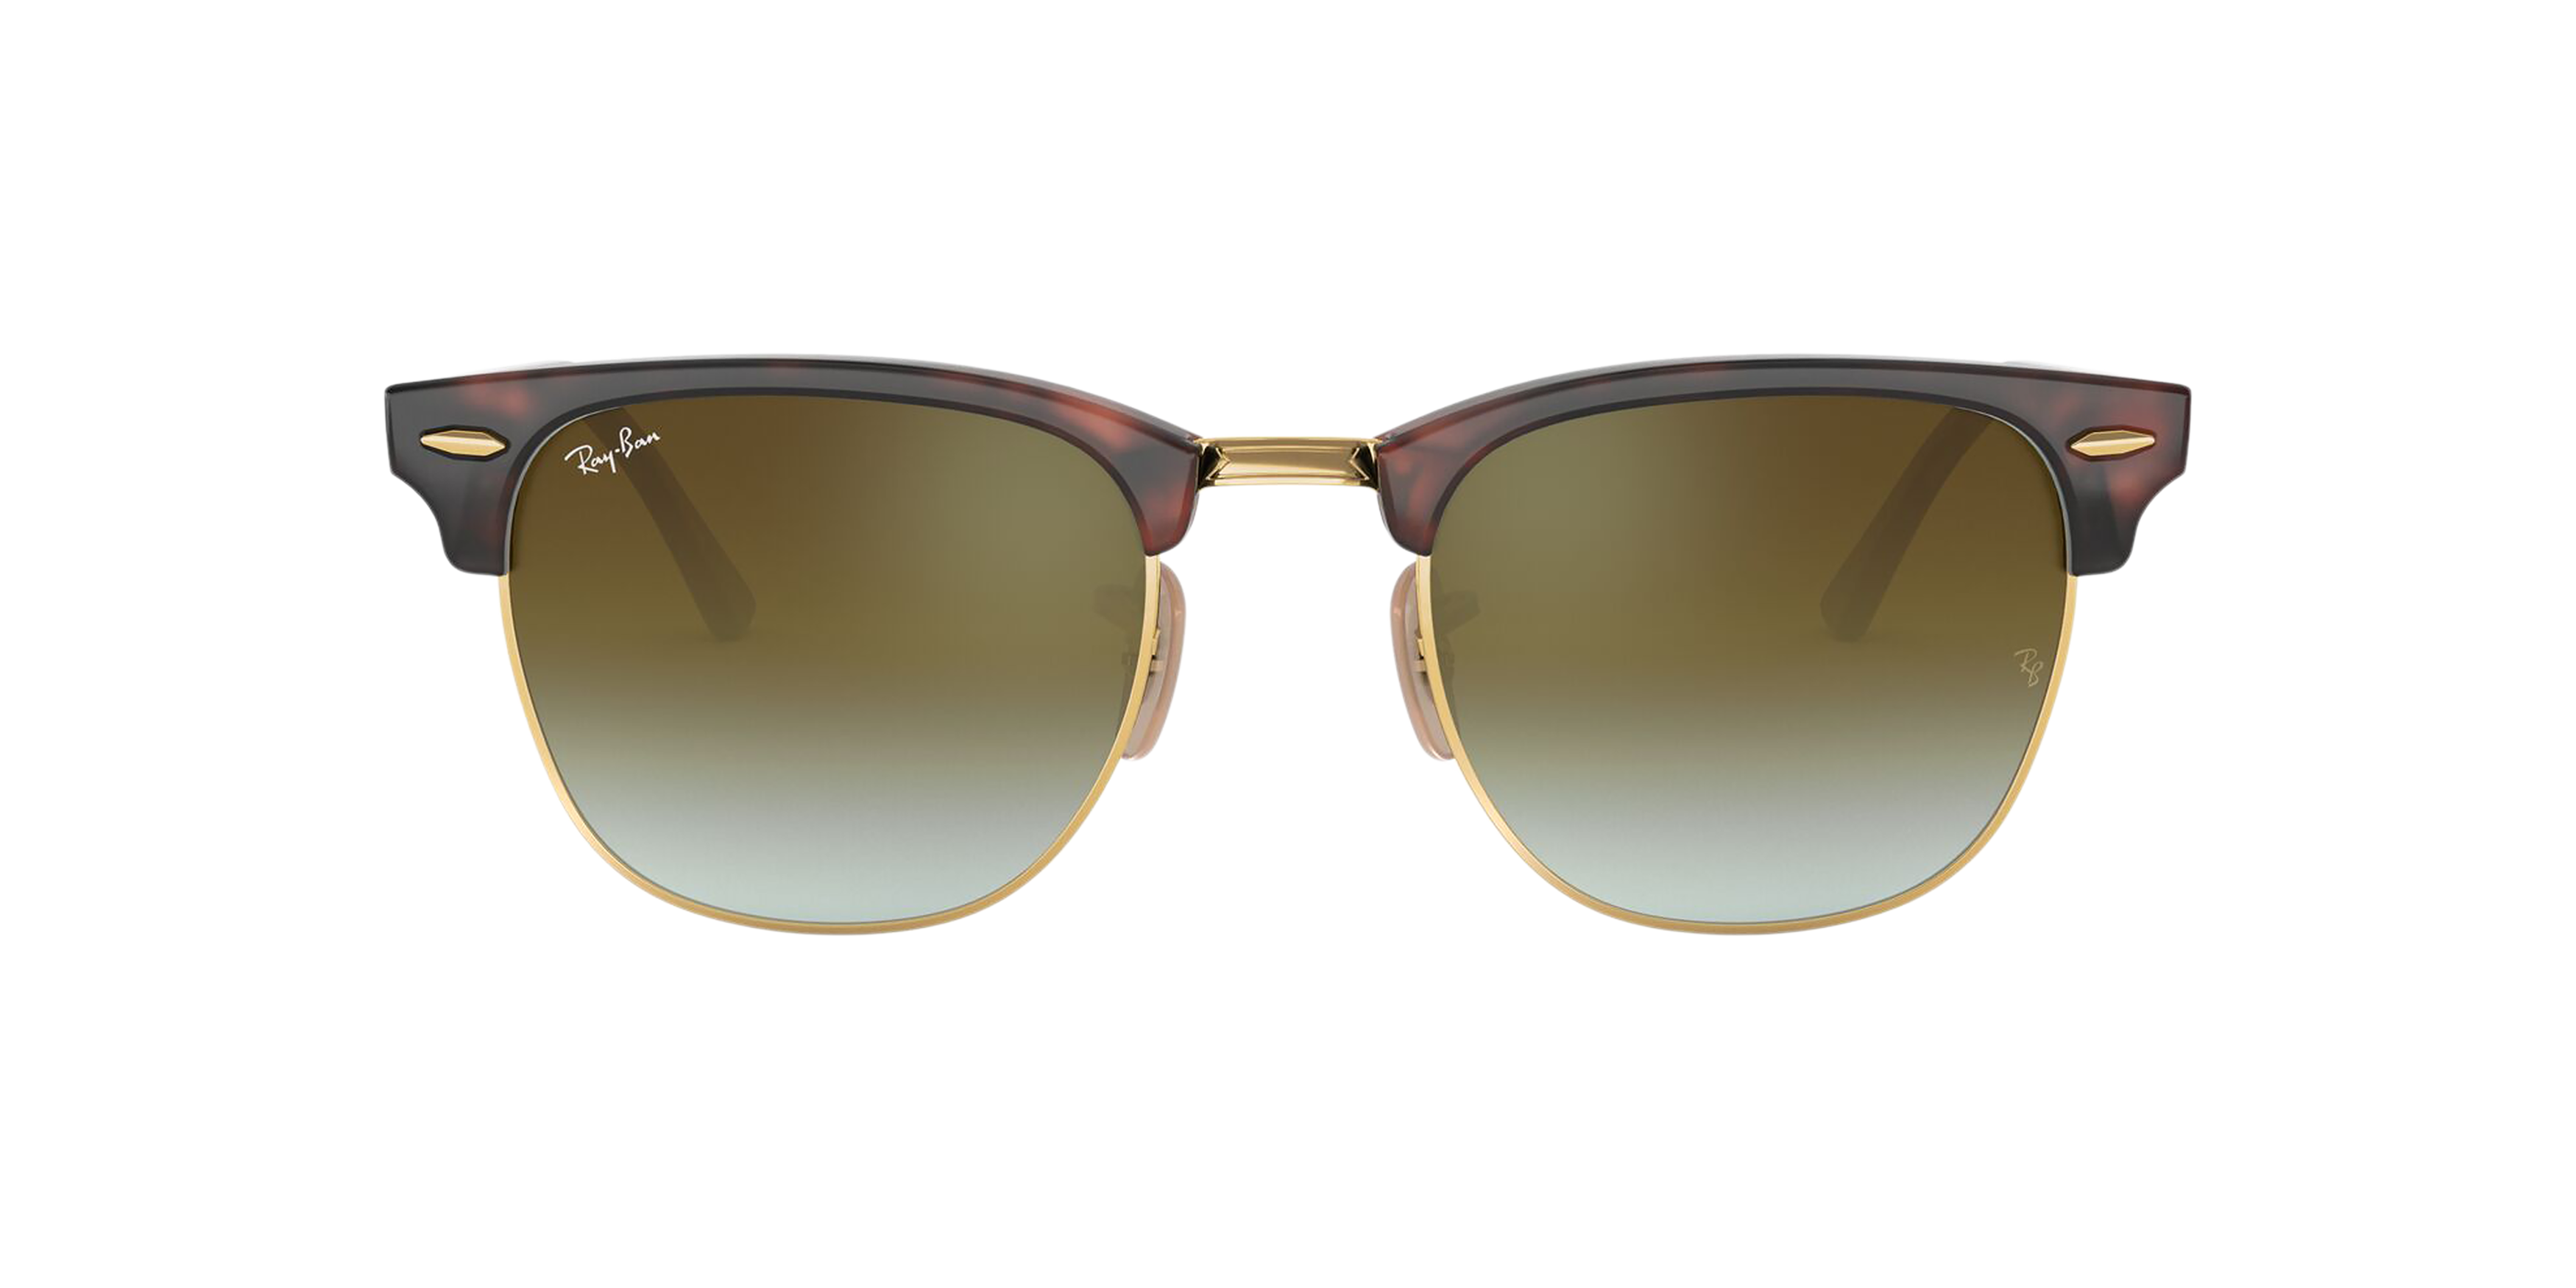 [products.image.front] Ray-Ban Clubmaster Flash Gradient RB3016 990/9J